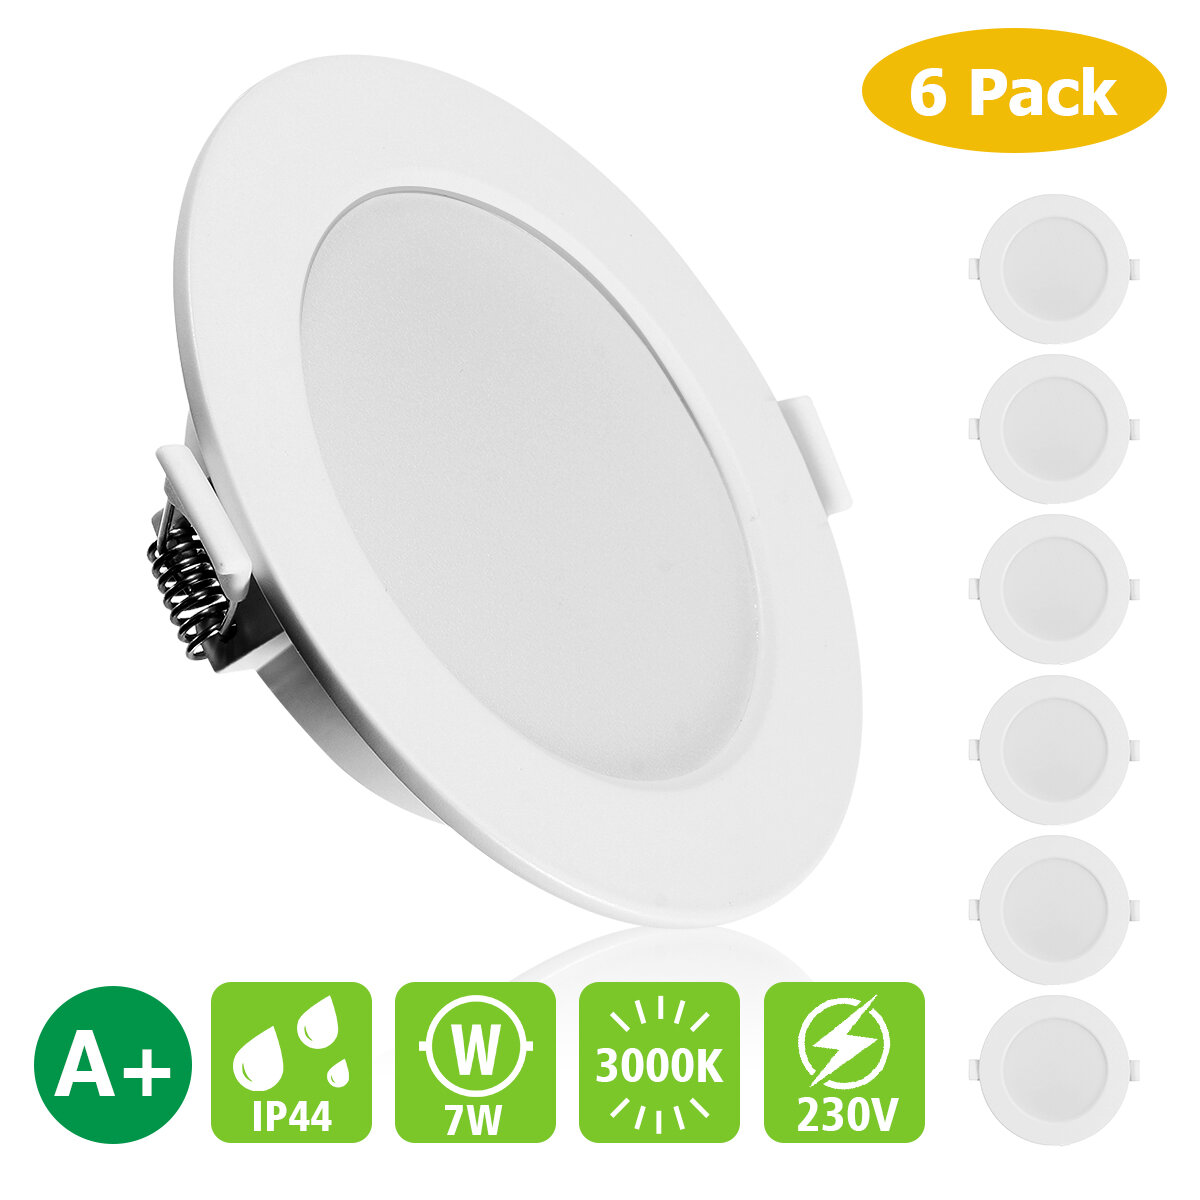 best price,kingso,6pcs,ac230v,6w,led,recessed,ceiling,light,spotlights,eu,coupon,price,discount